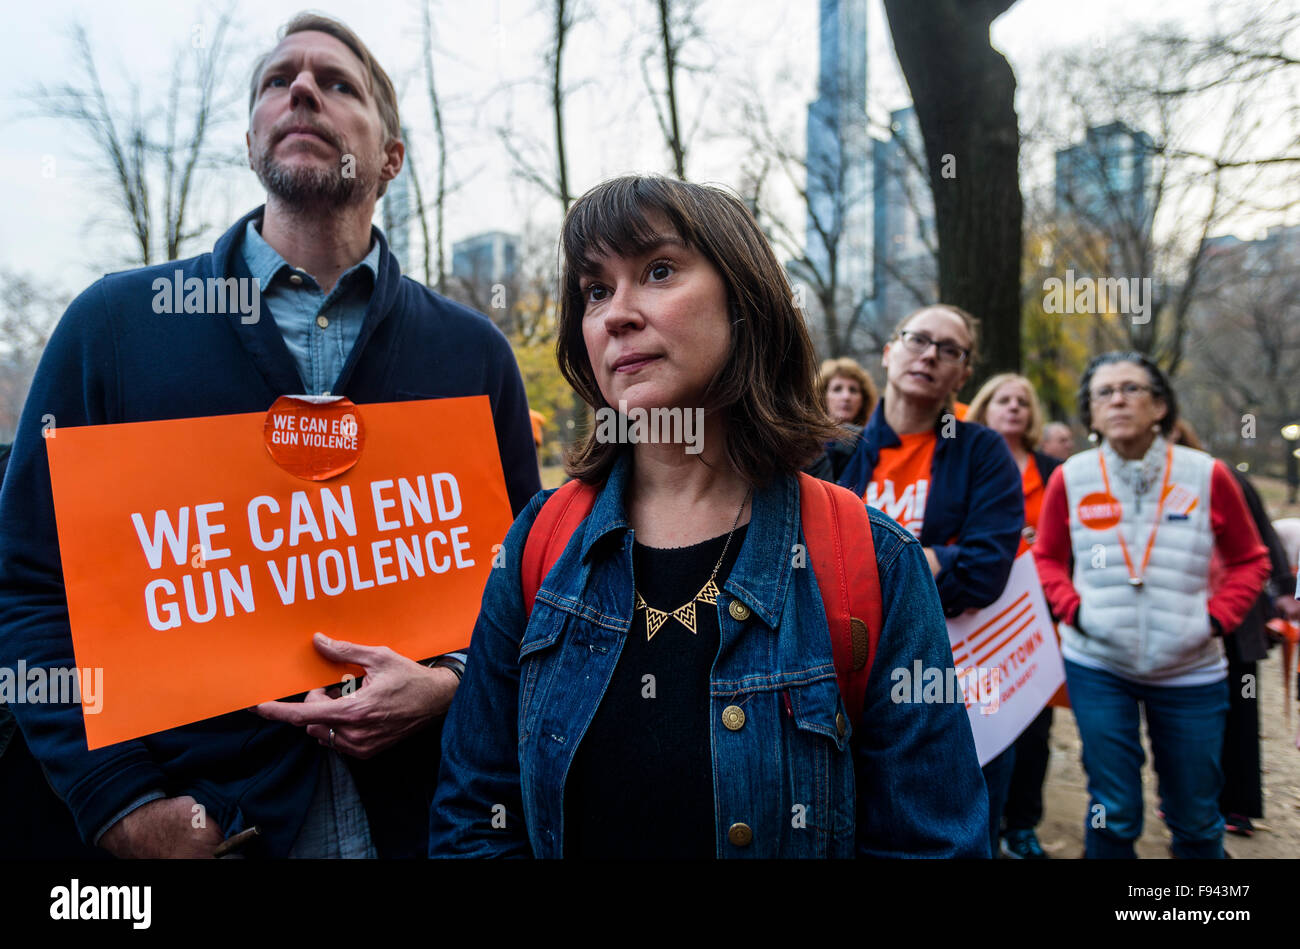 New York, NY 13 December 2015 Several hundred Families, advocates and Survivors wear orange for the Orange Walk & rally in Central Park to mark the 3rd Anniversary of the shooting at Sandy Hook Elementary School and call for common sense gun control laws. Credit: Stacy Walsh Rosenstock/Alamy Stock Photo